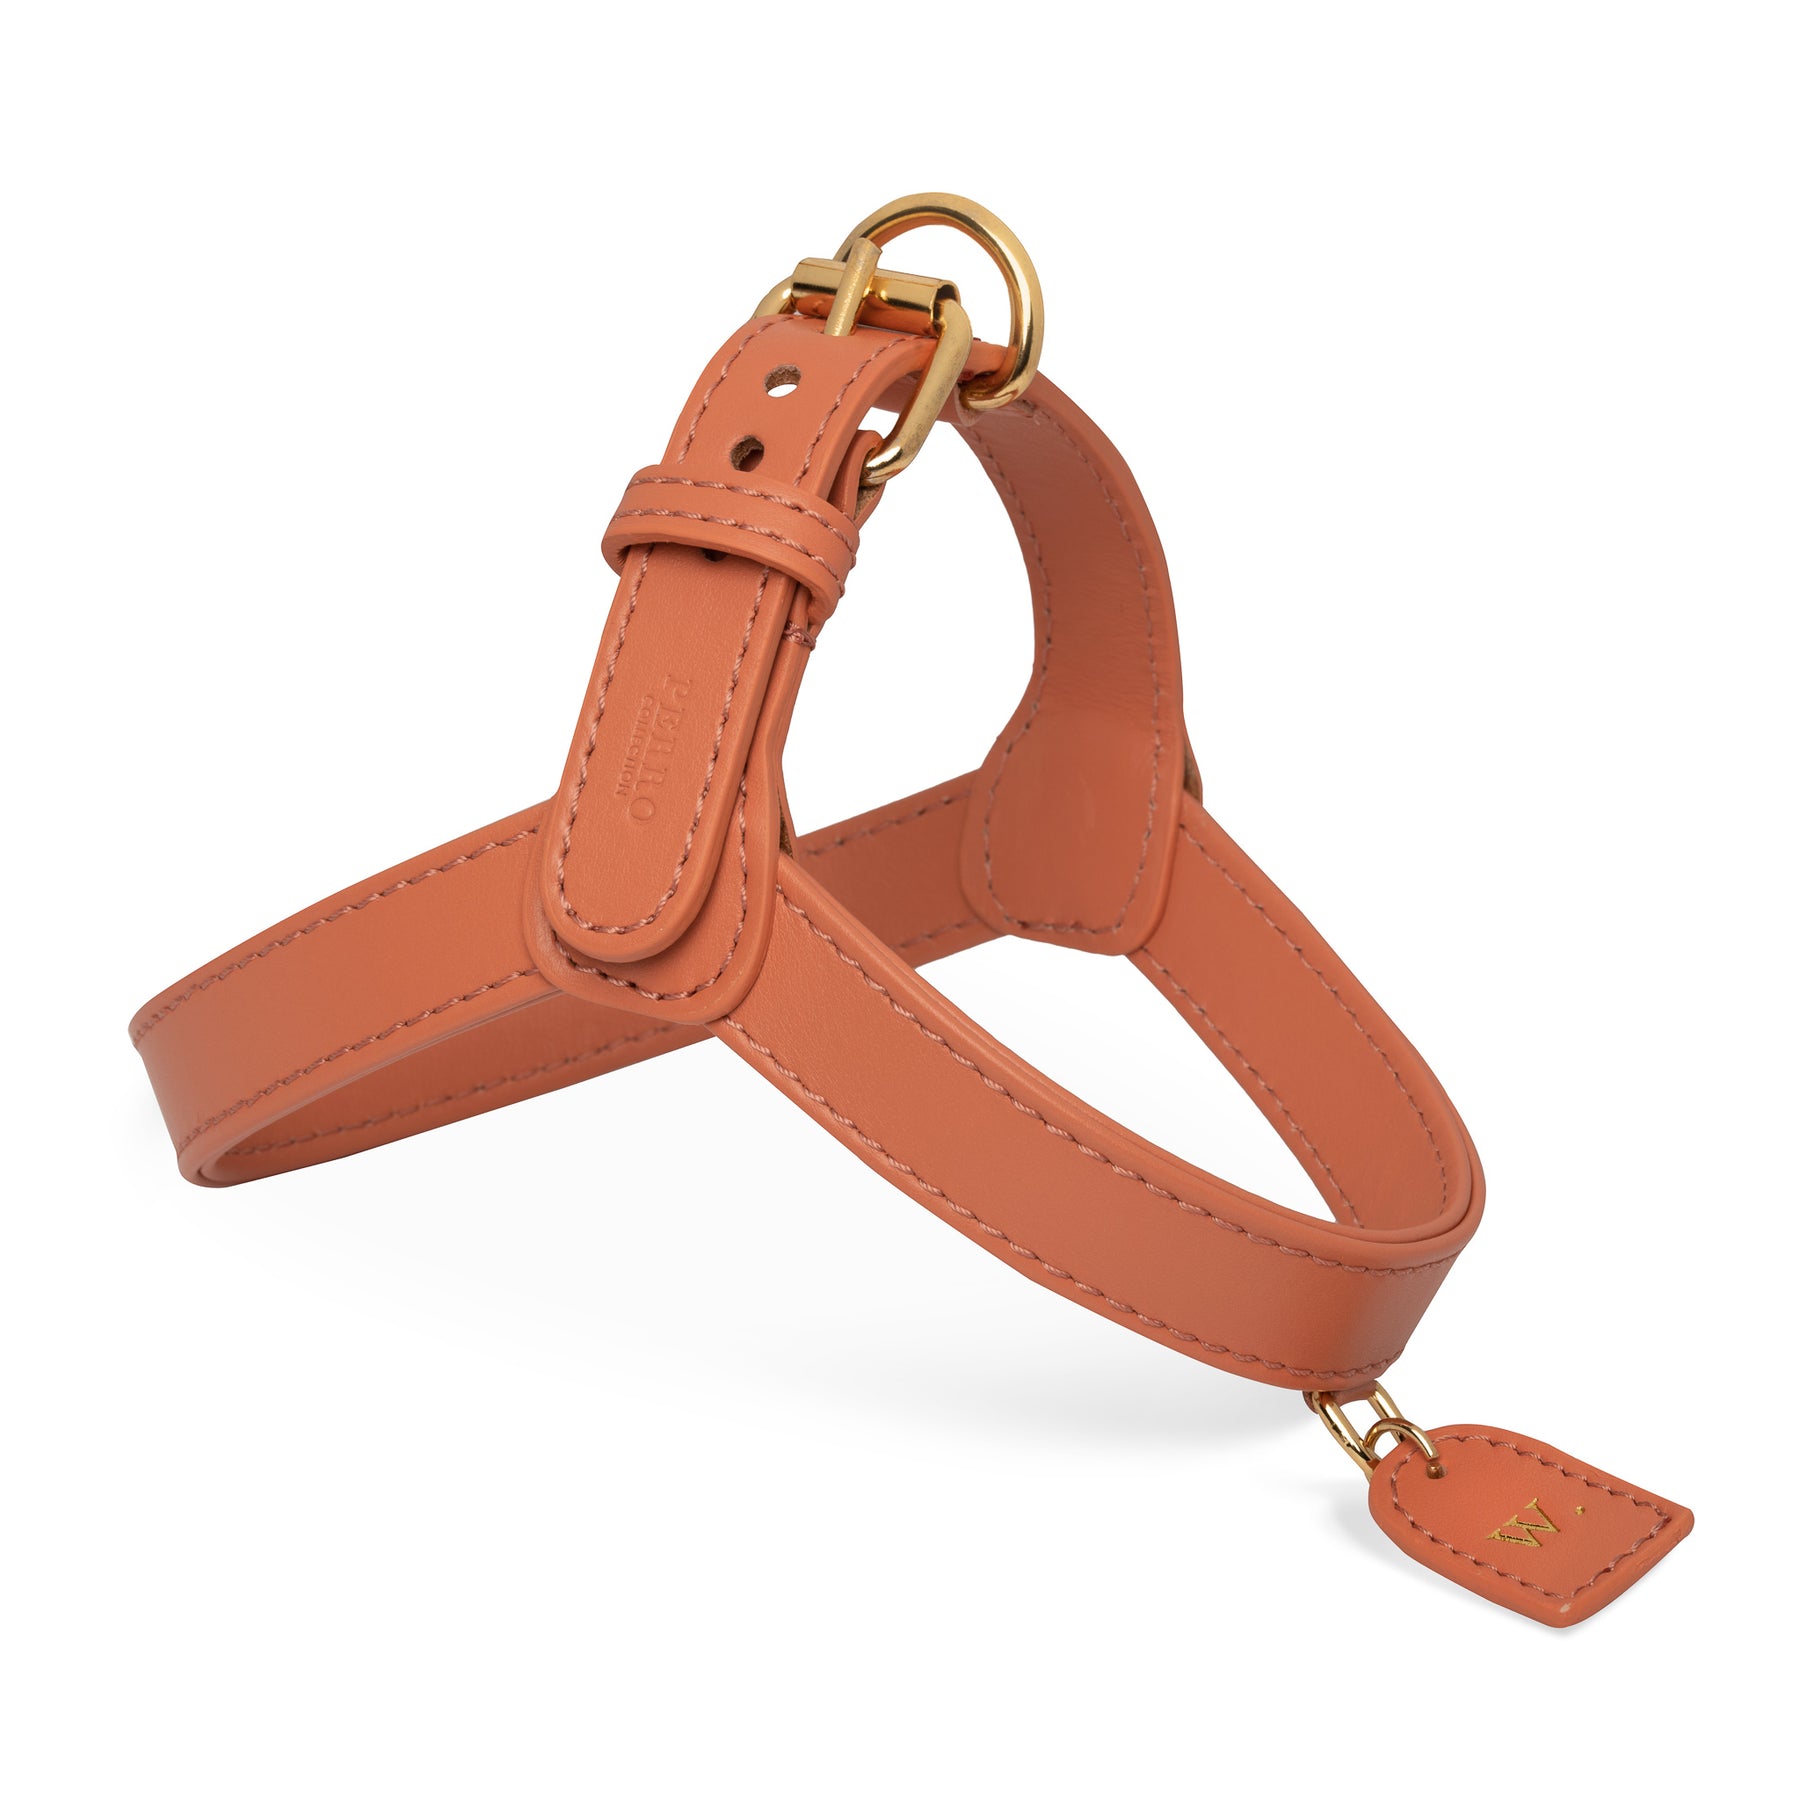 Salmon pink harness - Leather harness for your dog